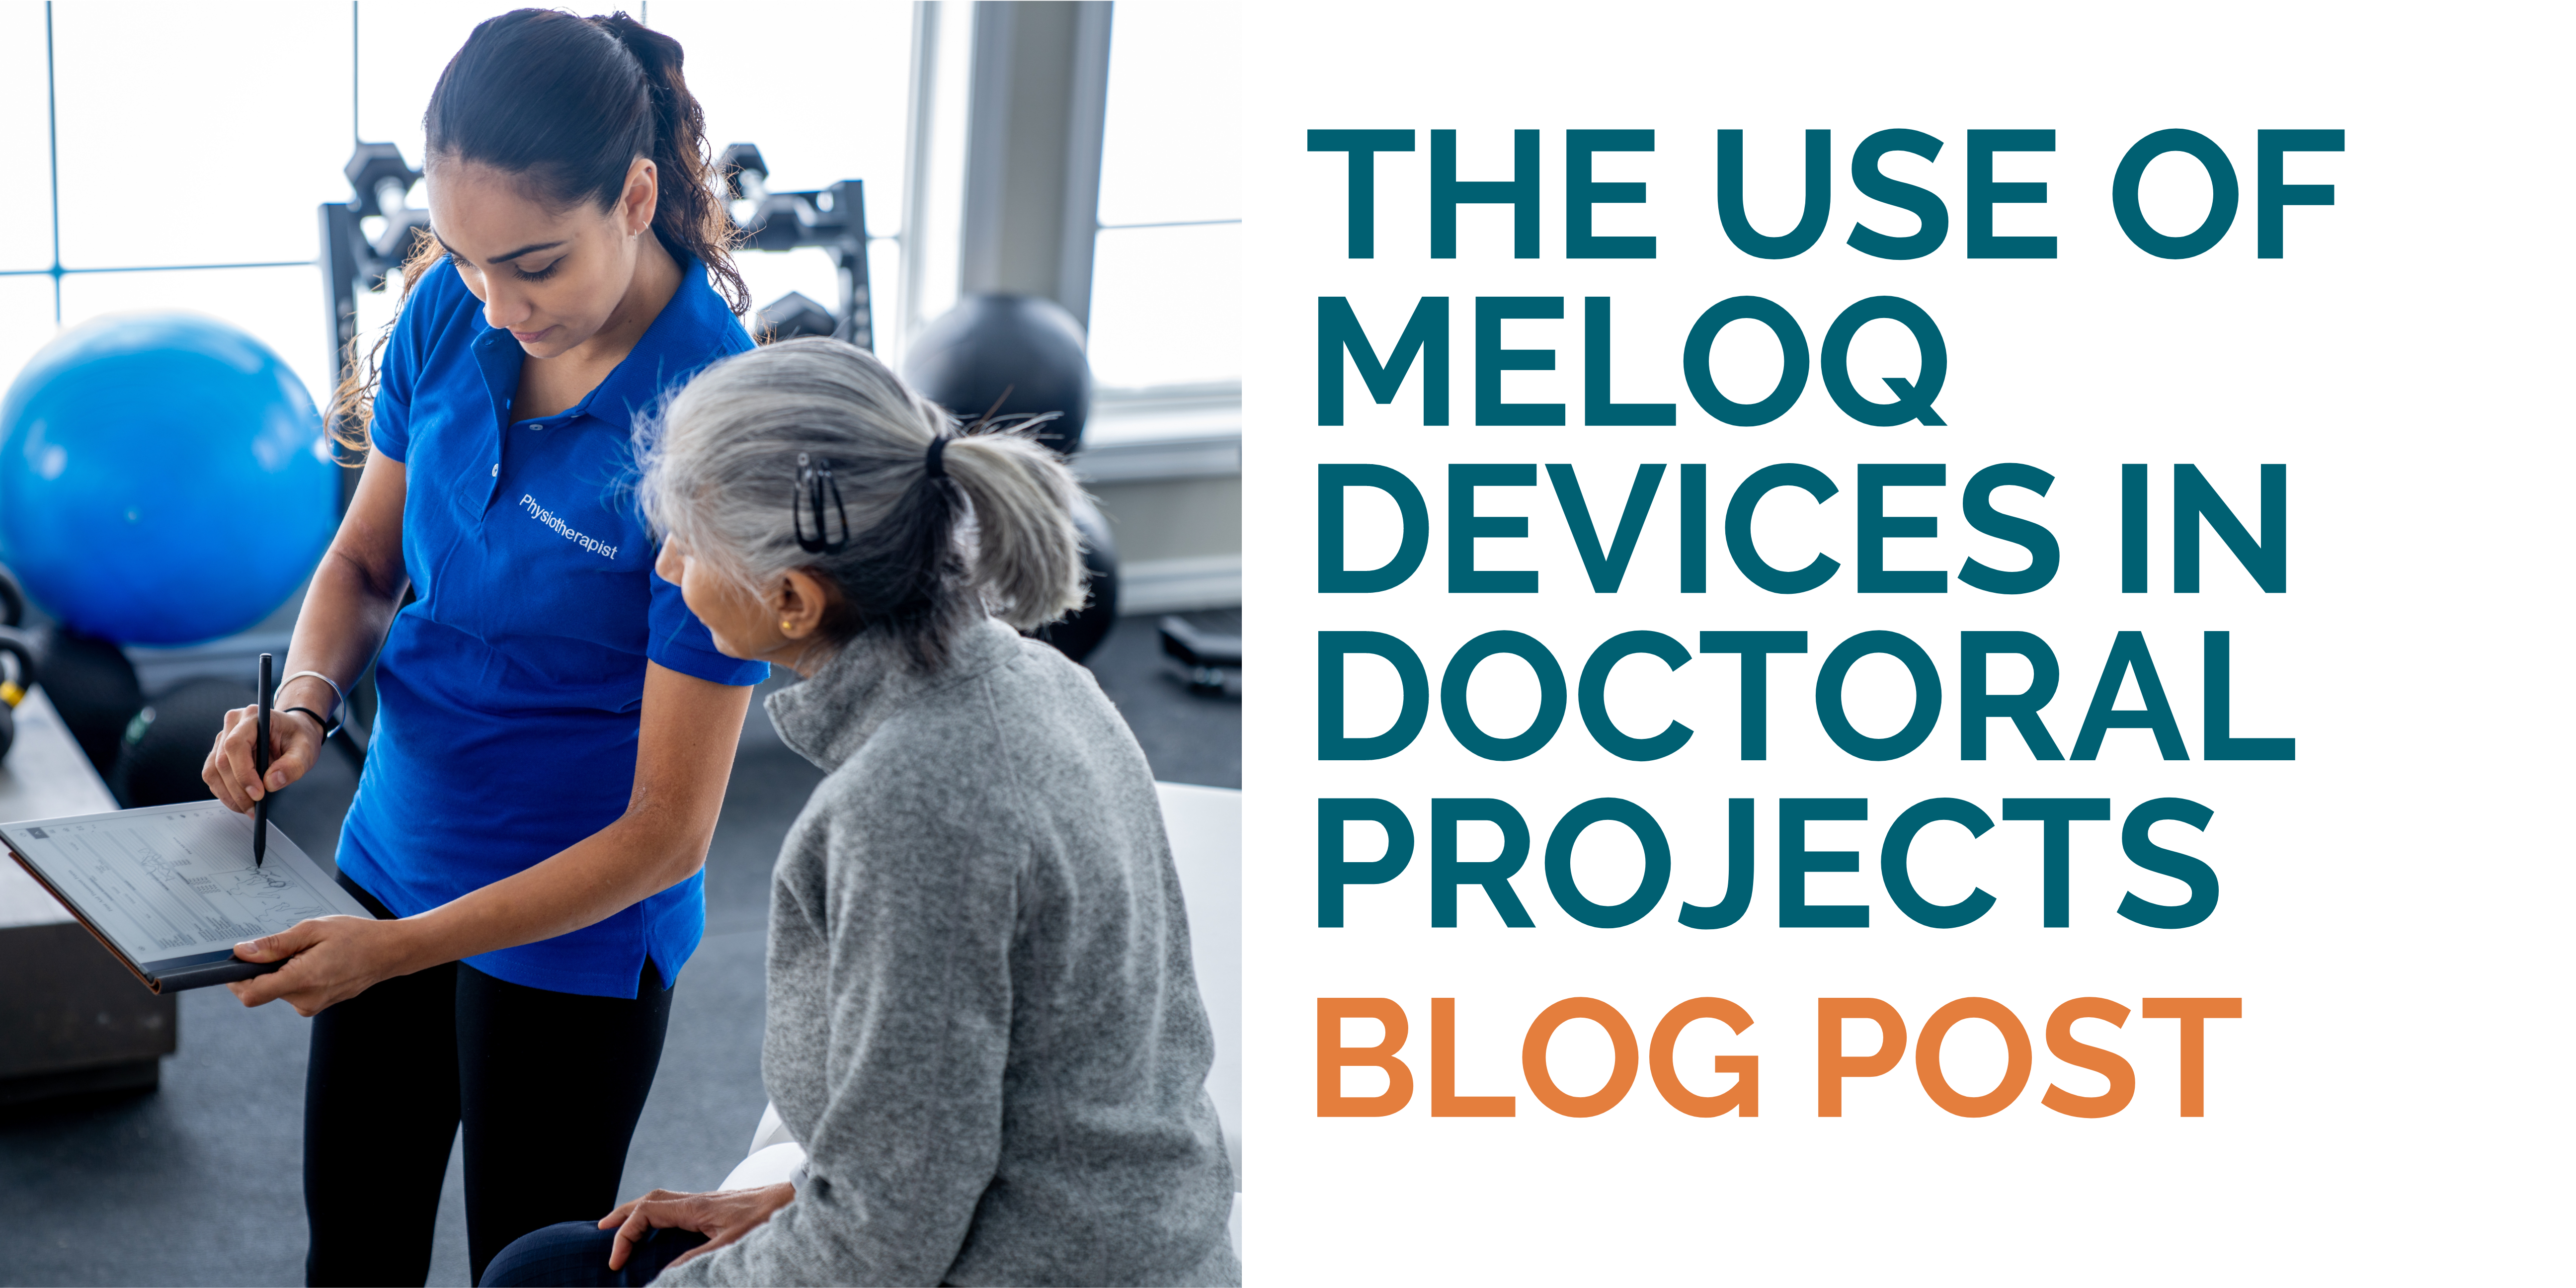 THE USE OF MELOQ DEVICES IN DOCTORAL PROJECTS: RESEARCHER EXPERIENCES